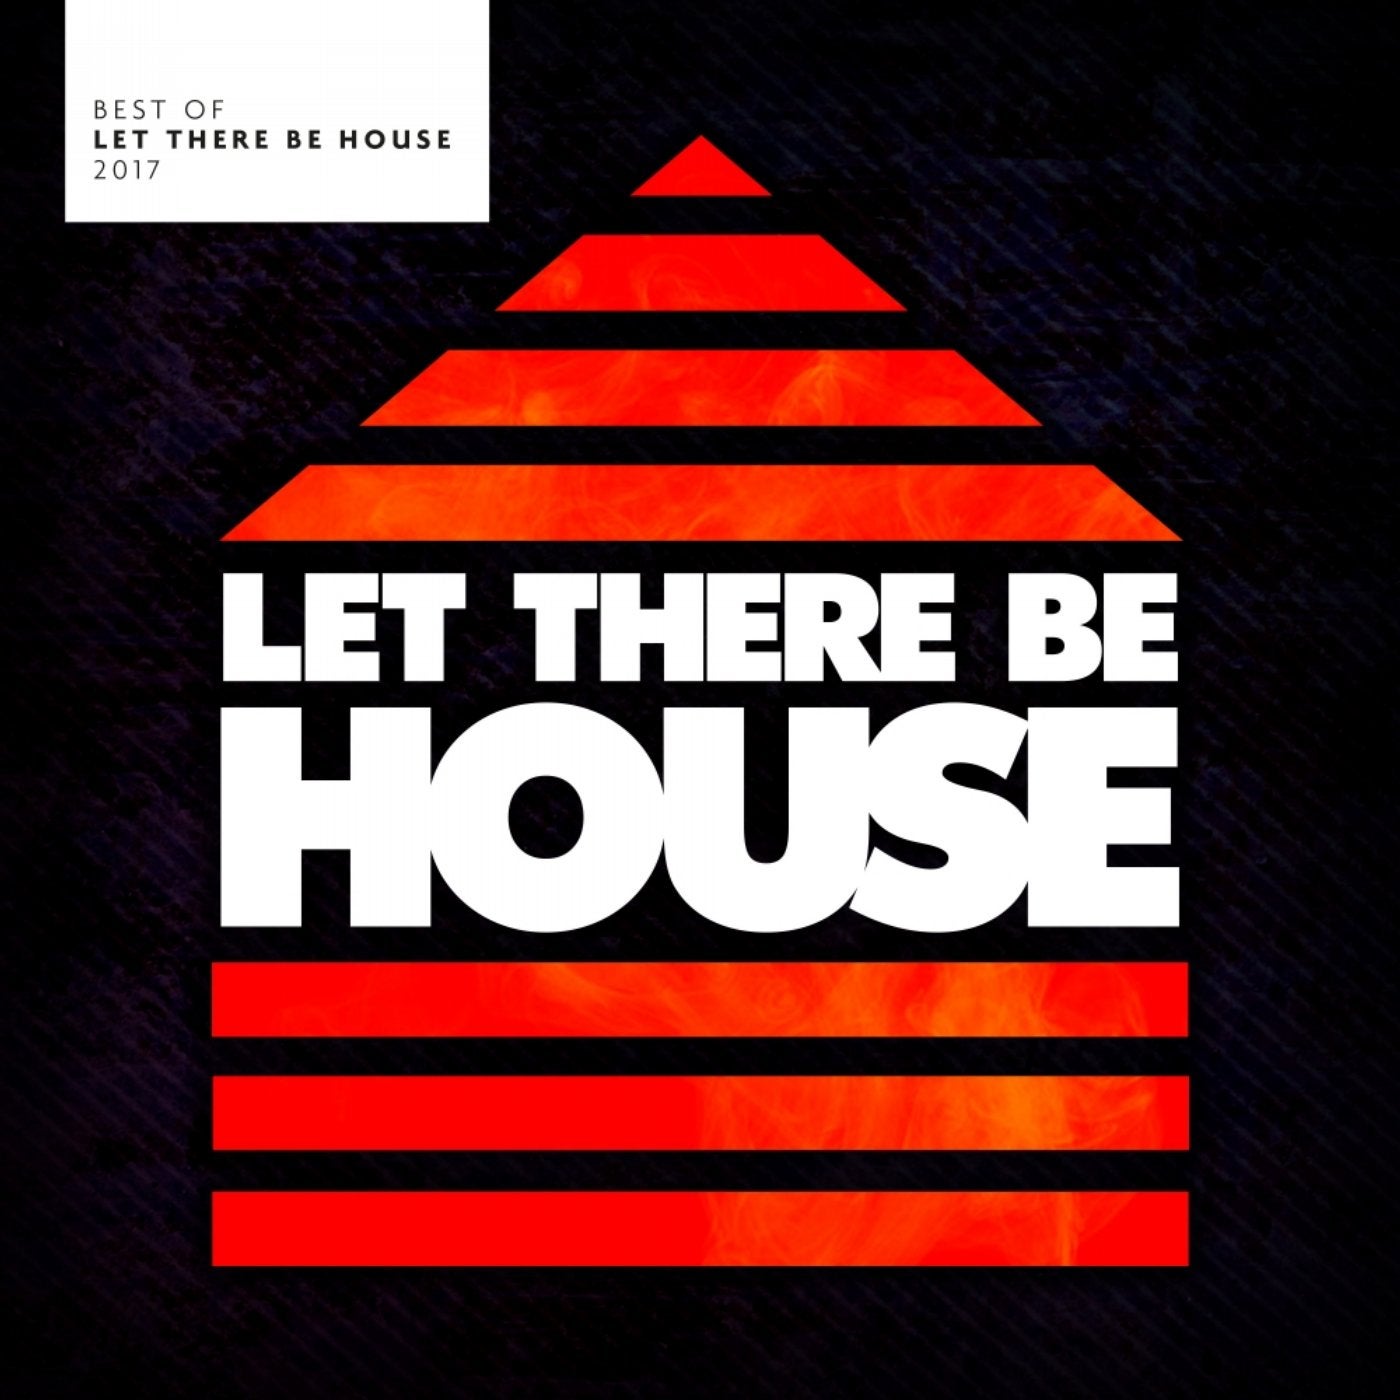 Best Of Let There Be House 2017